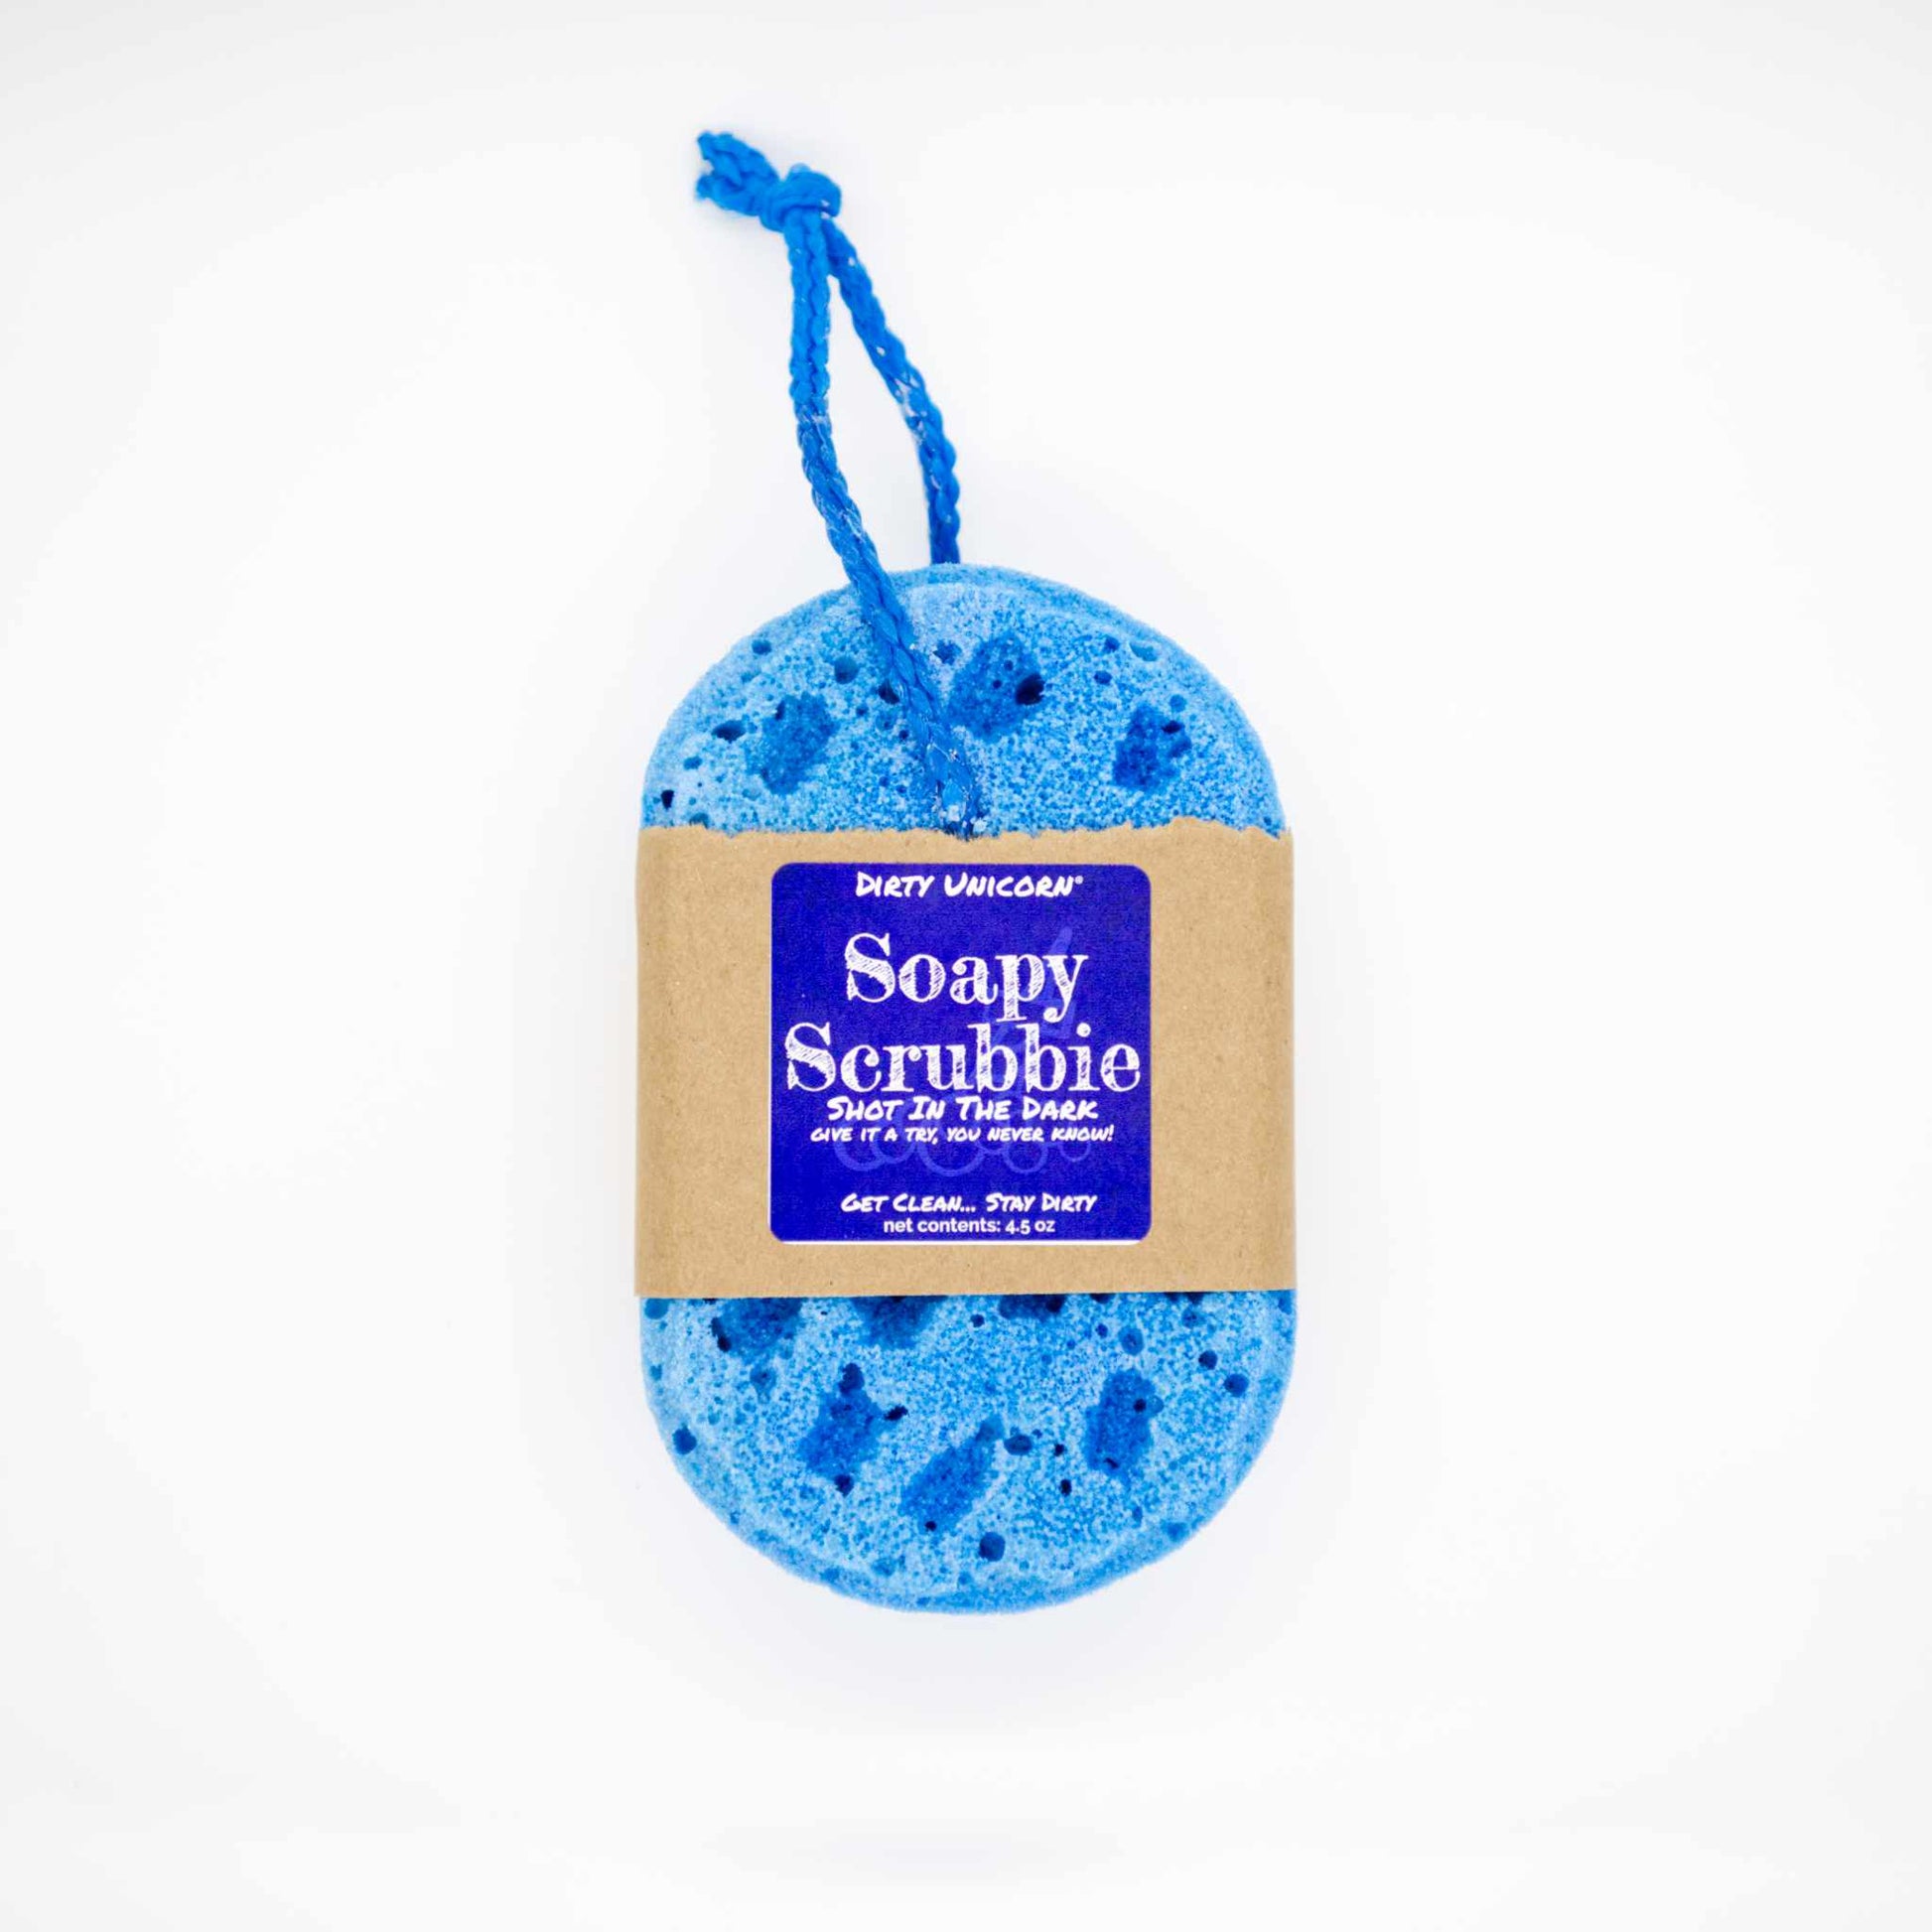 bright blue bath sponge with coordinating rope for hanging. on blank white background. Sponge is wrapped in brown Kraft paper belly band with an blue label barring product title